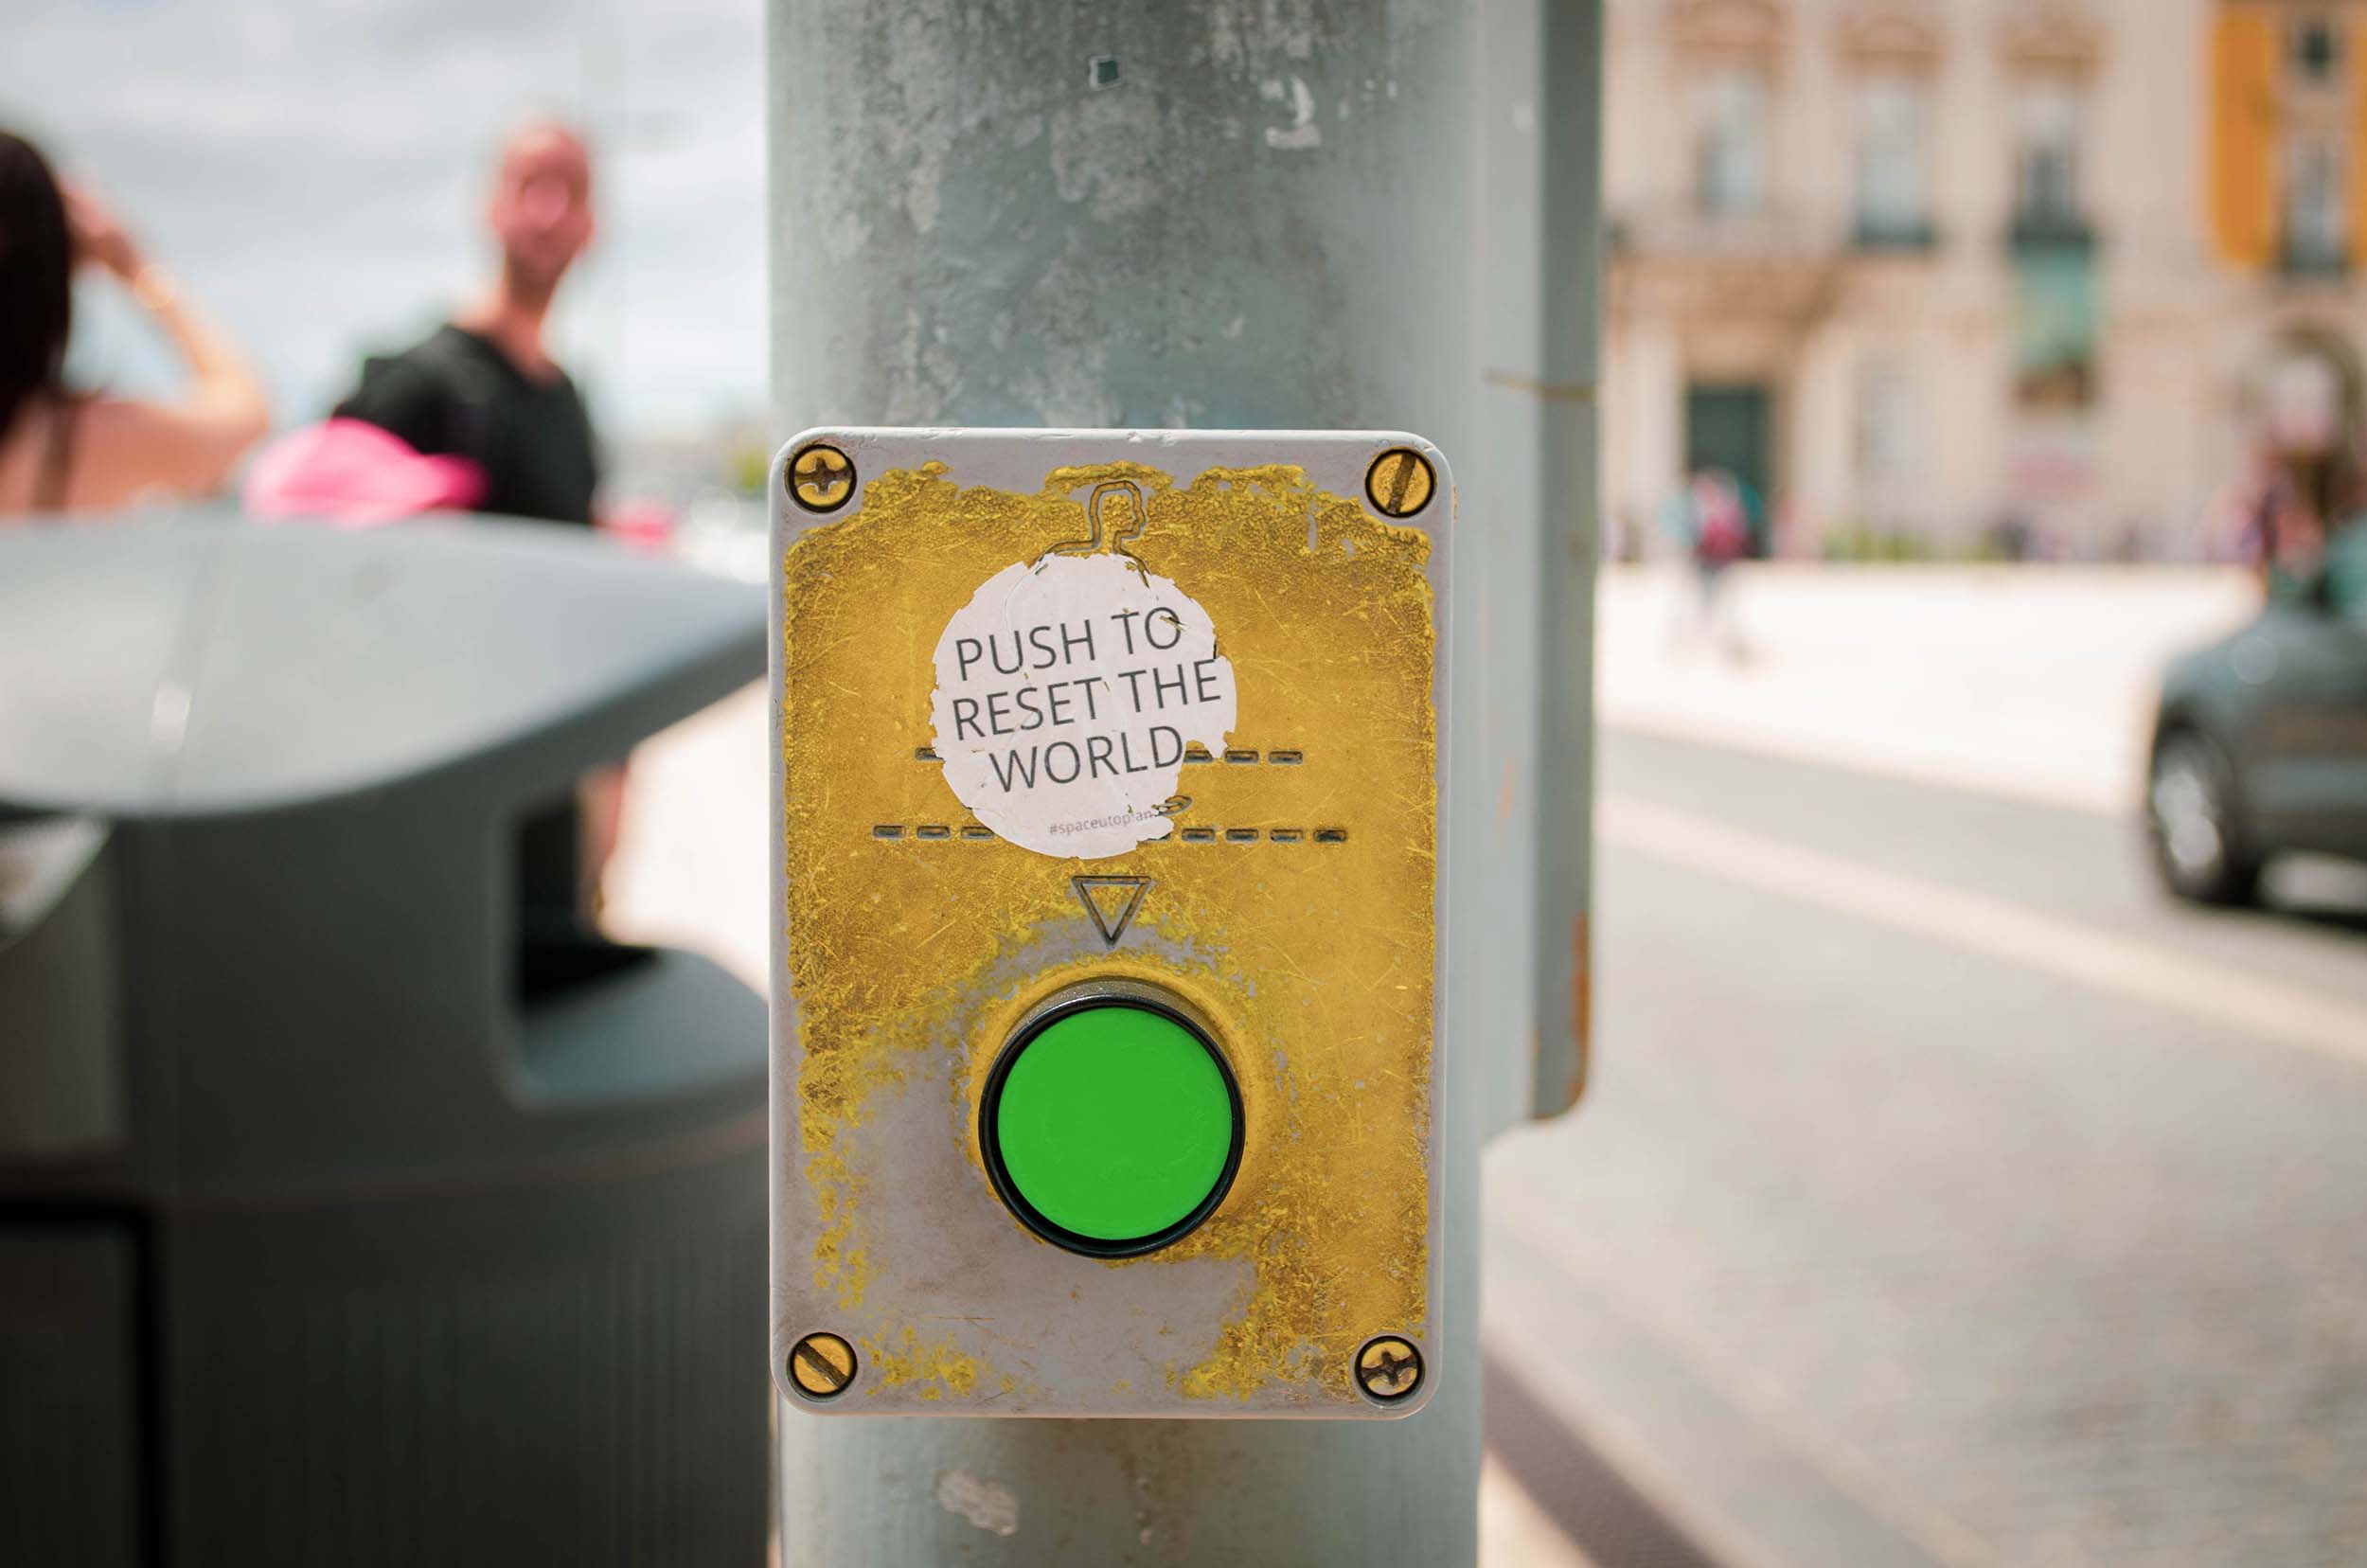 A crosswalk button with push to reset the world sticker on it